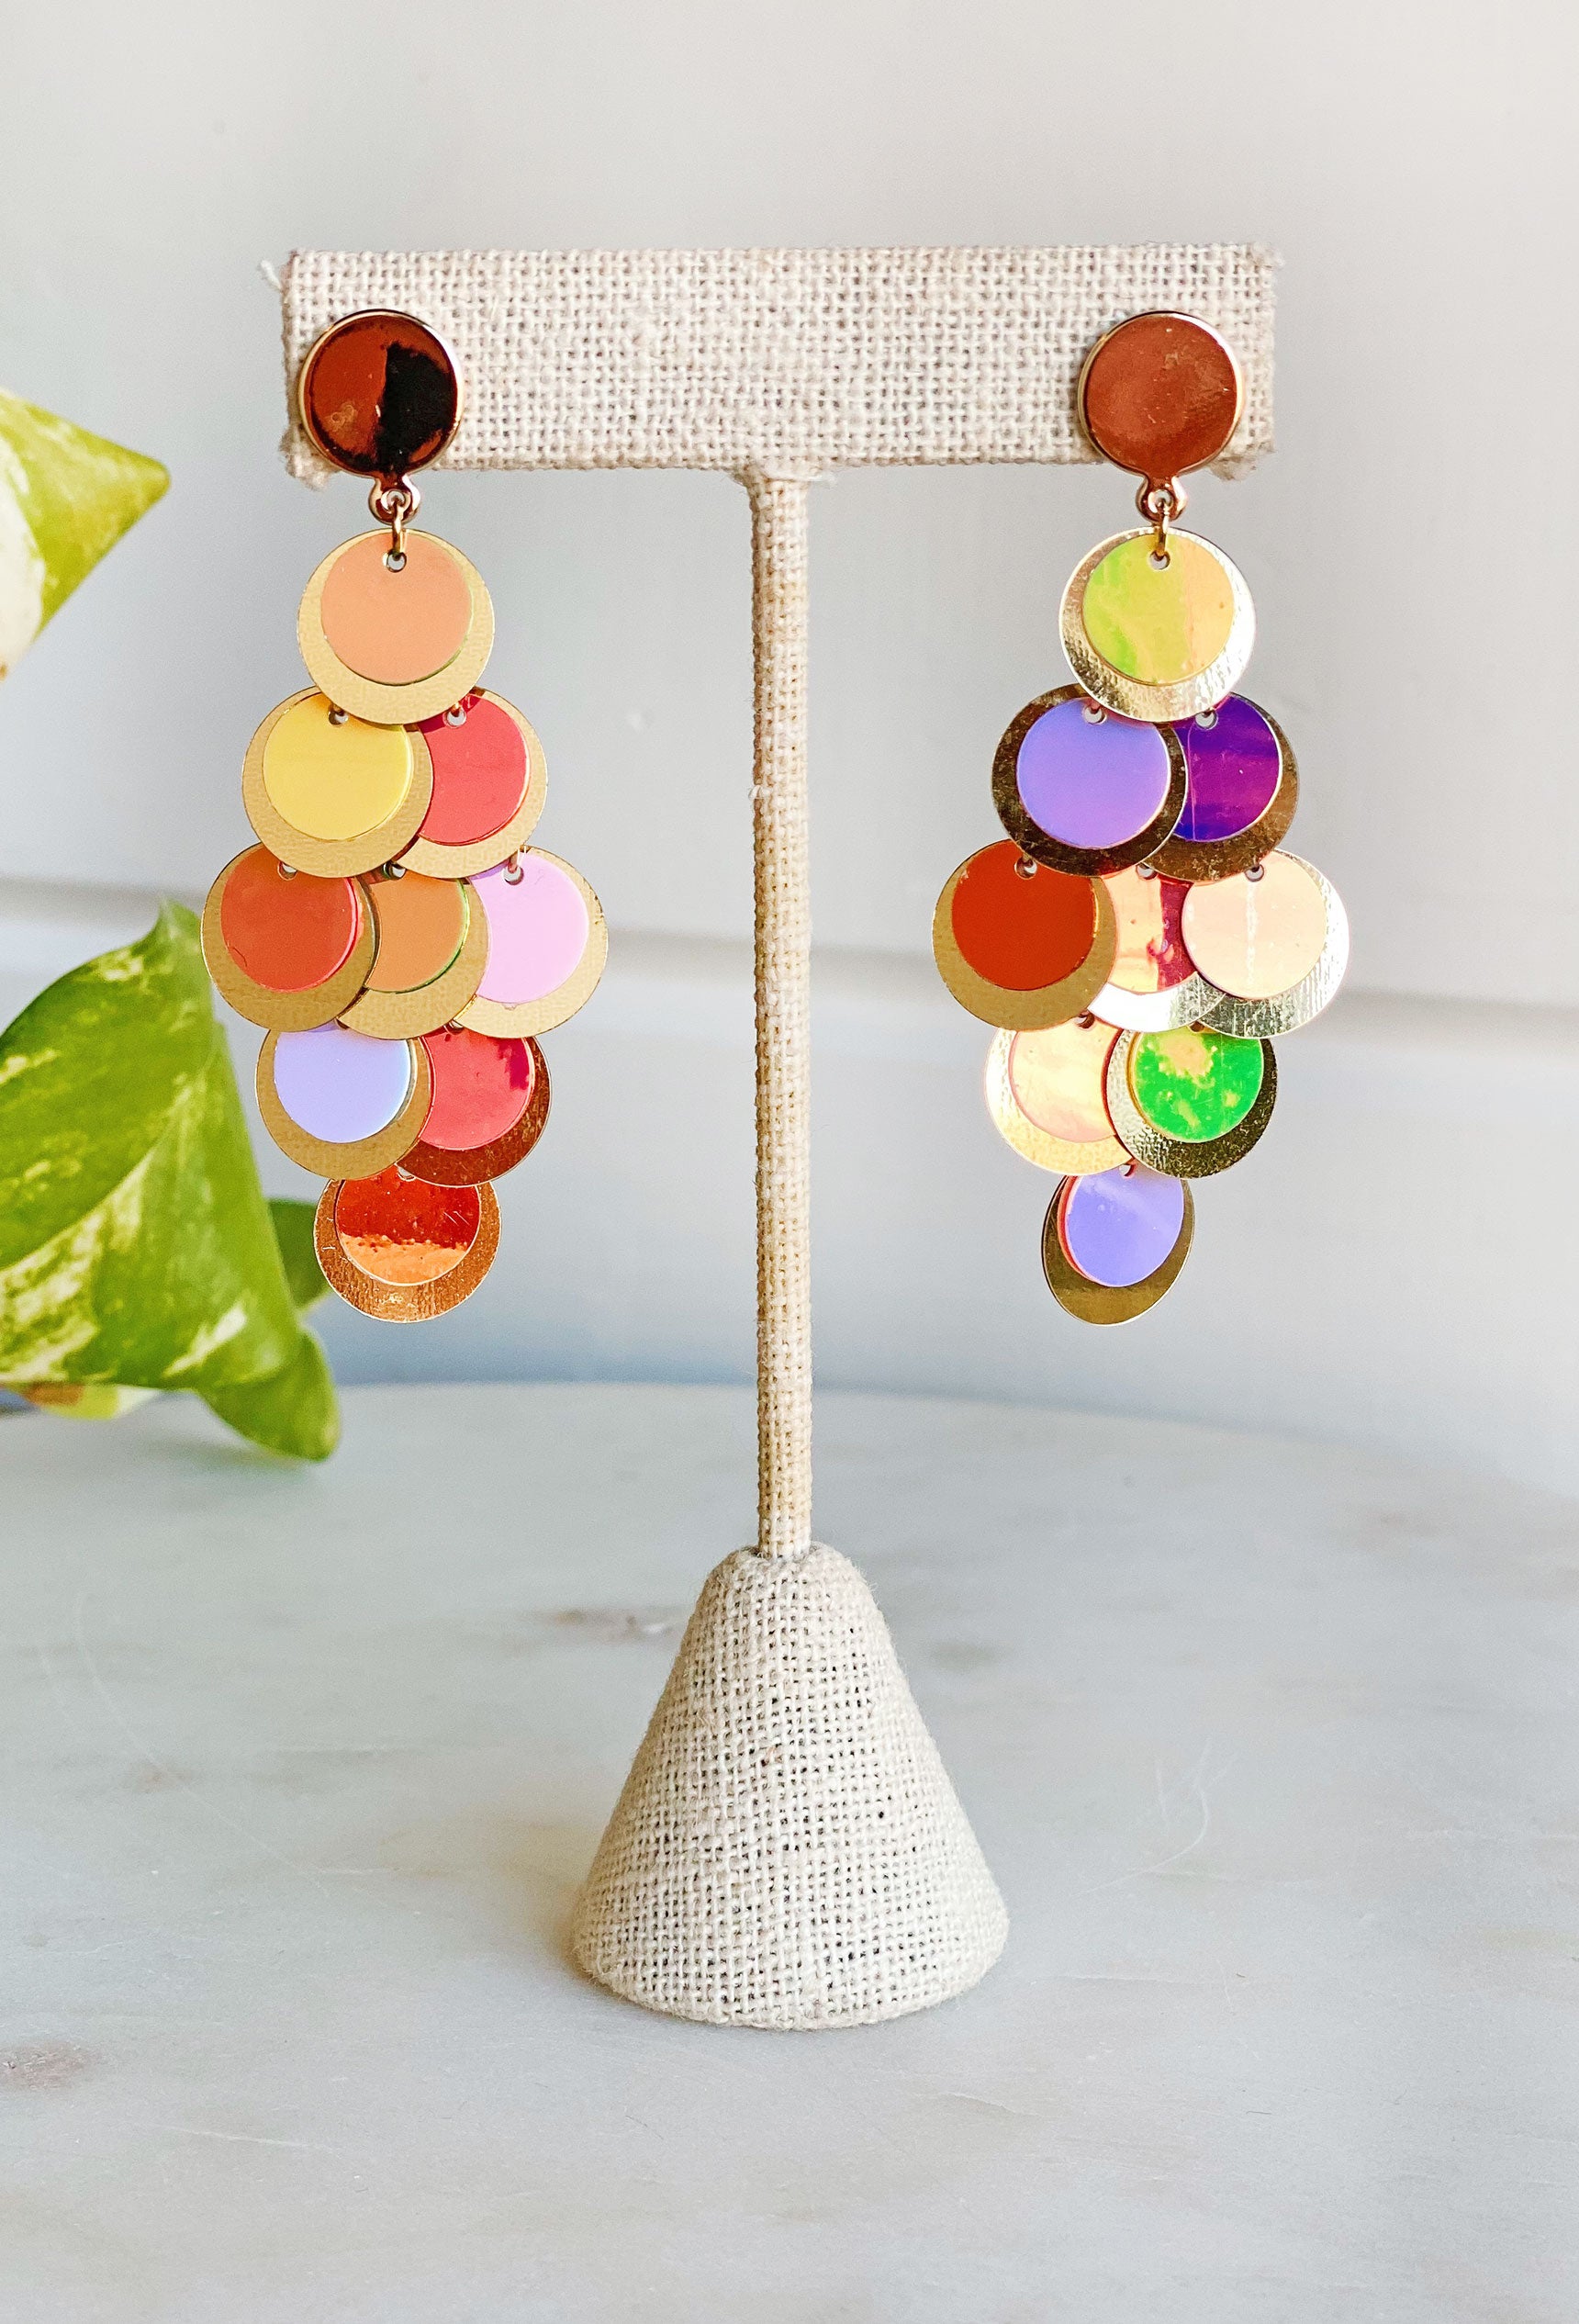 Shine Brighter Drop Earrings, drop earrings with gold and iridescent circles